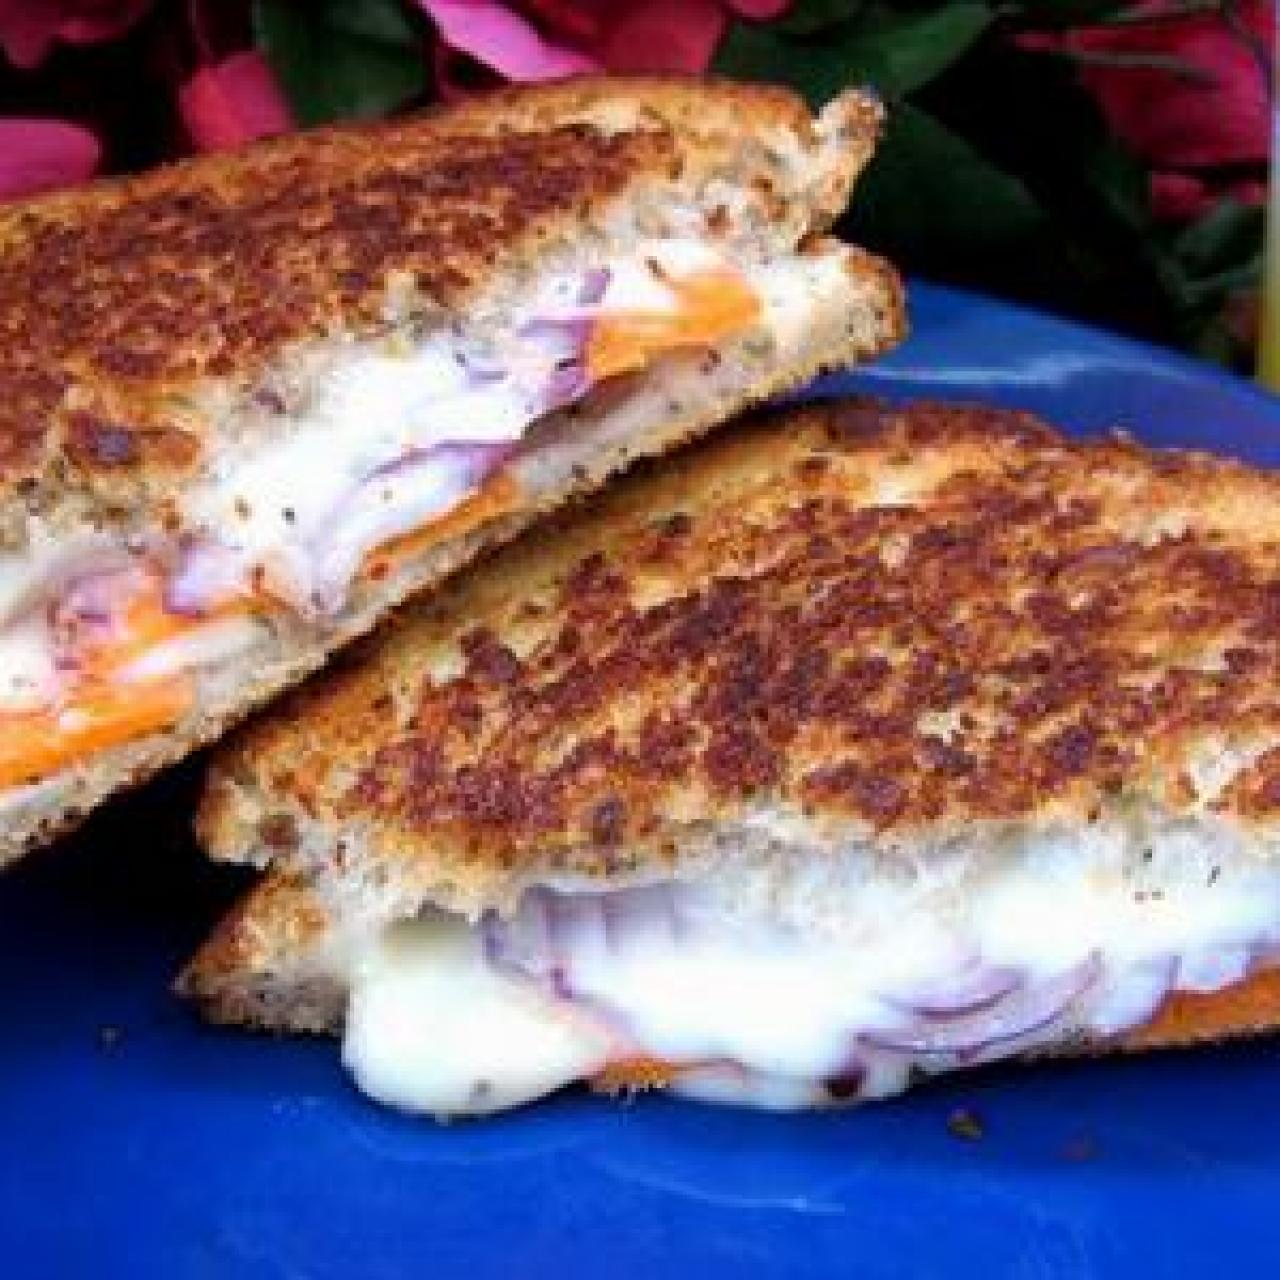 Easy Grilled Cheese - Craving Home Cooked